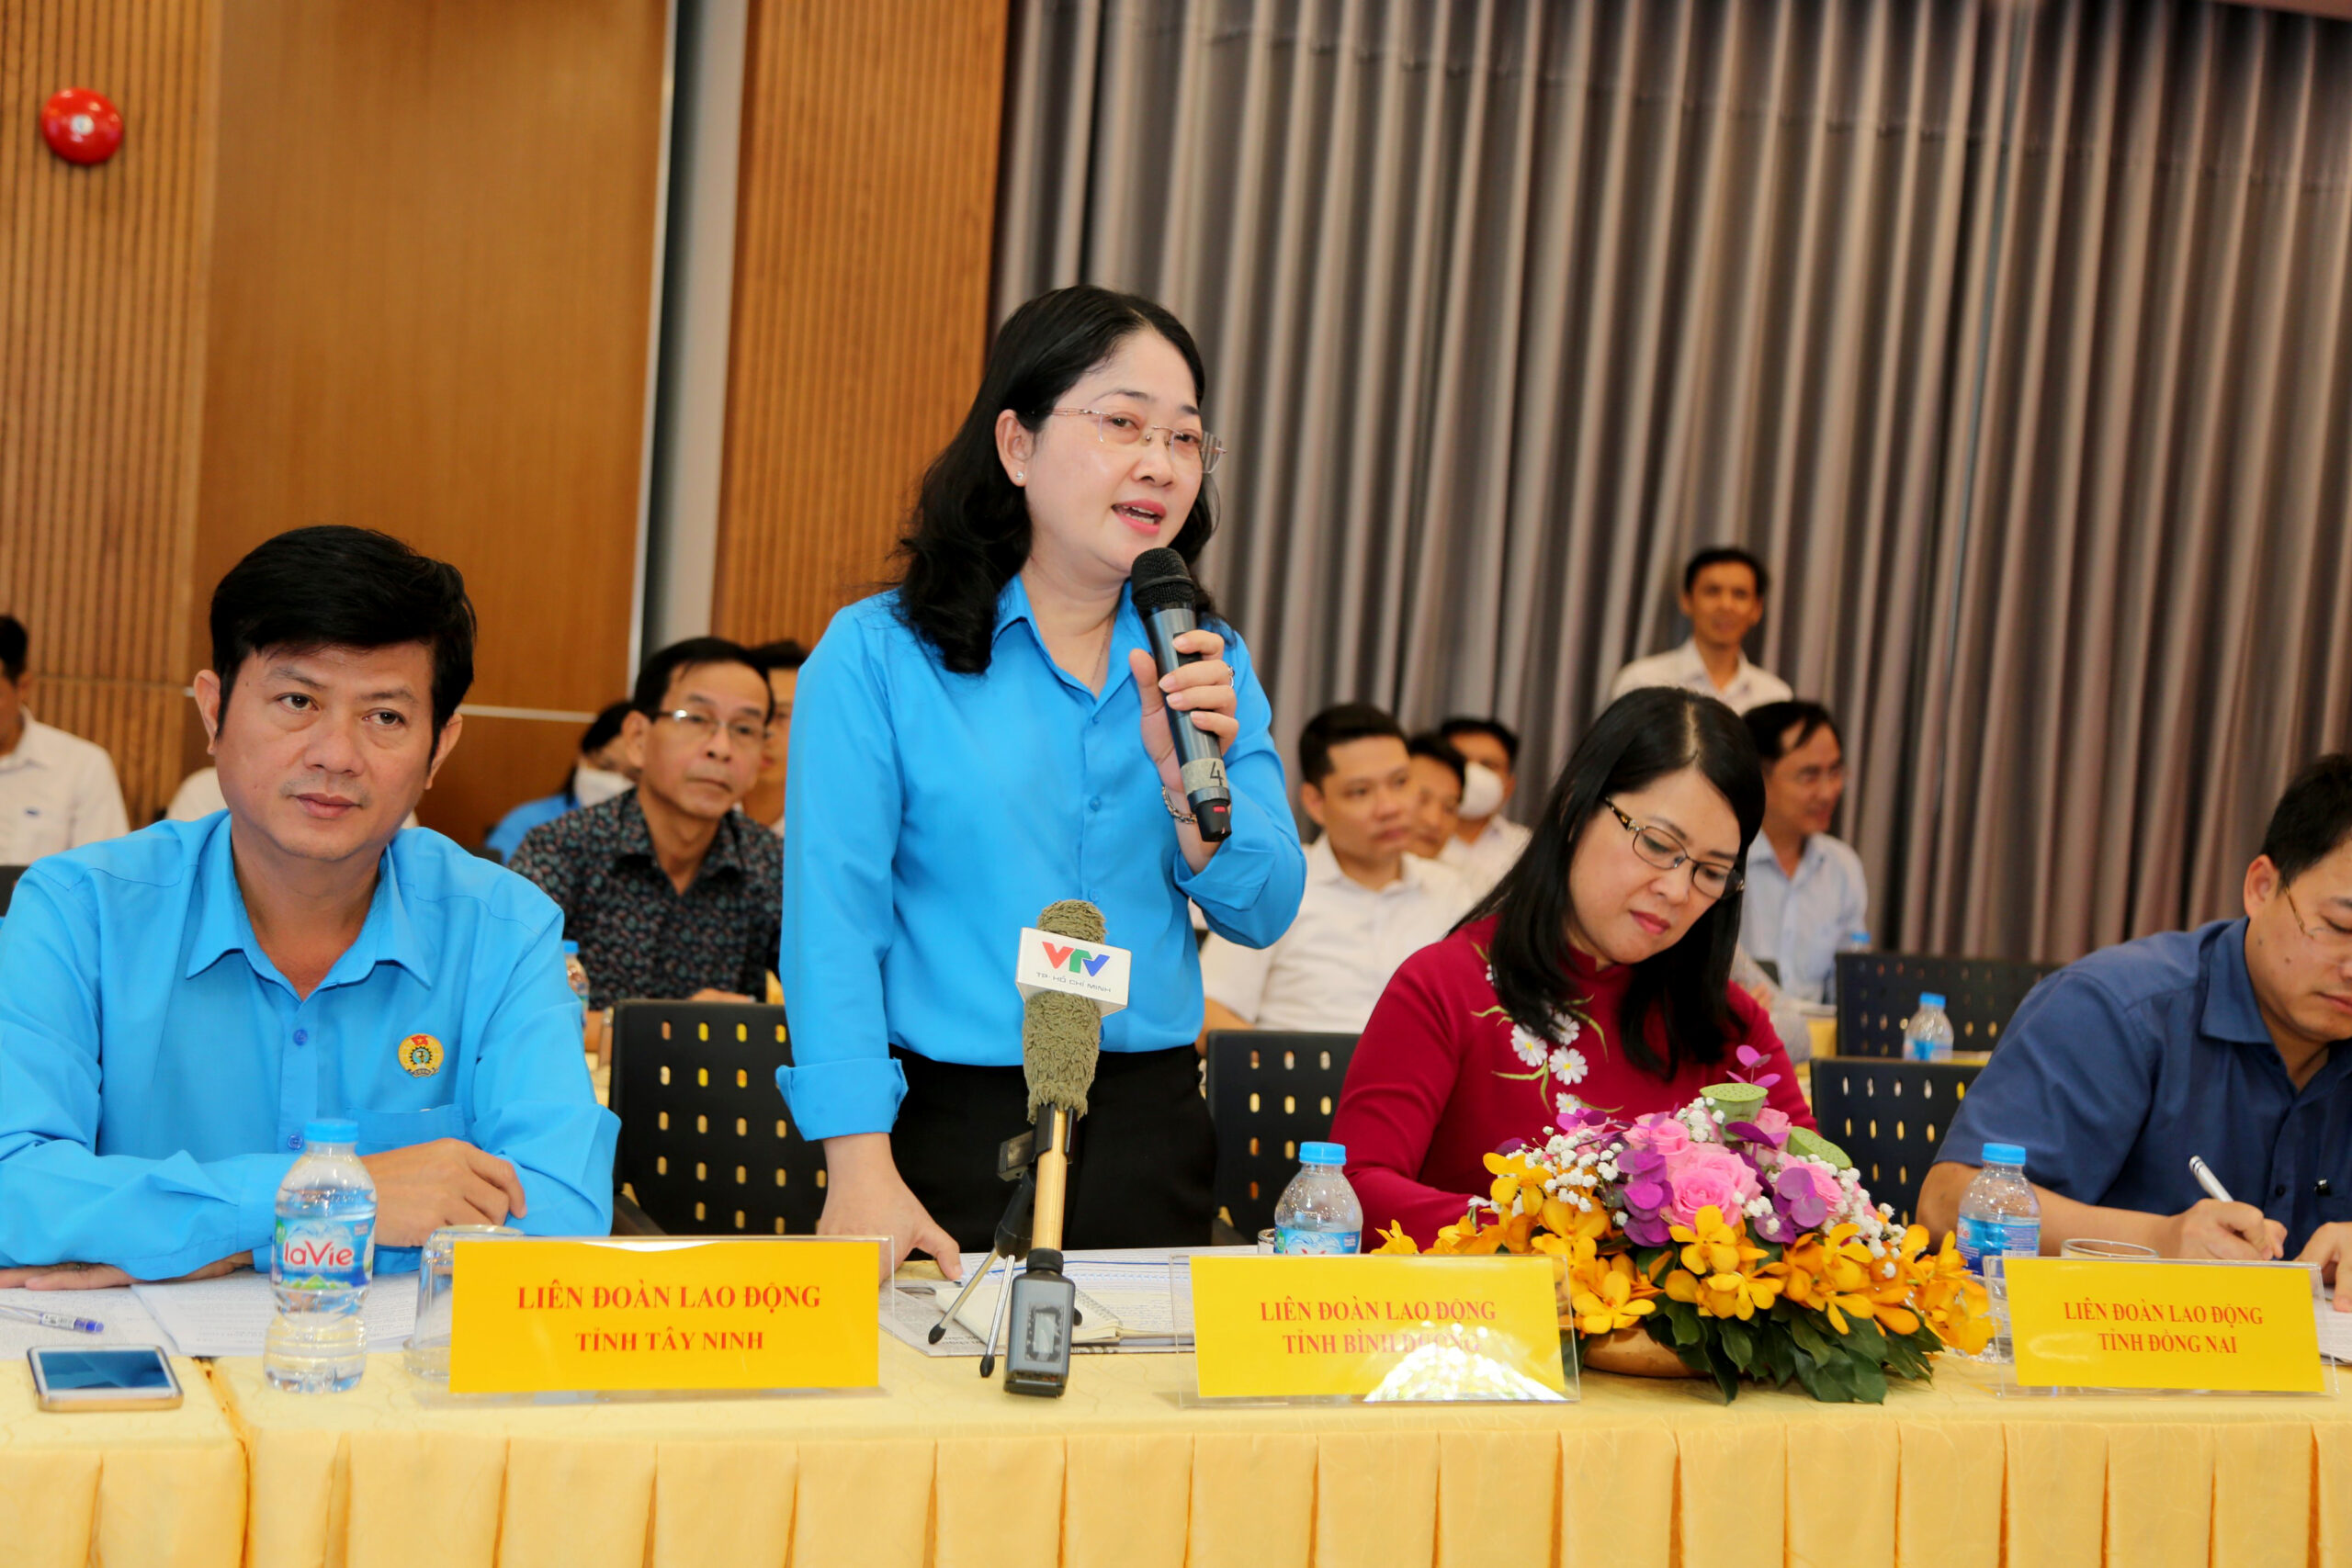 Ms. Nguyen Kim Loan - Chairwoman of the Binh Duong Provincial Labor Federation, gave a speech at the workshop.